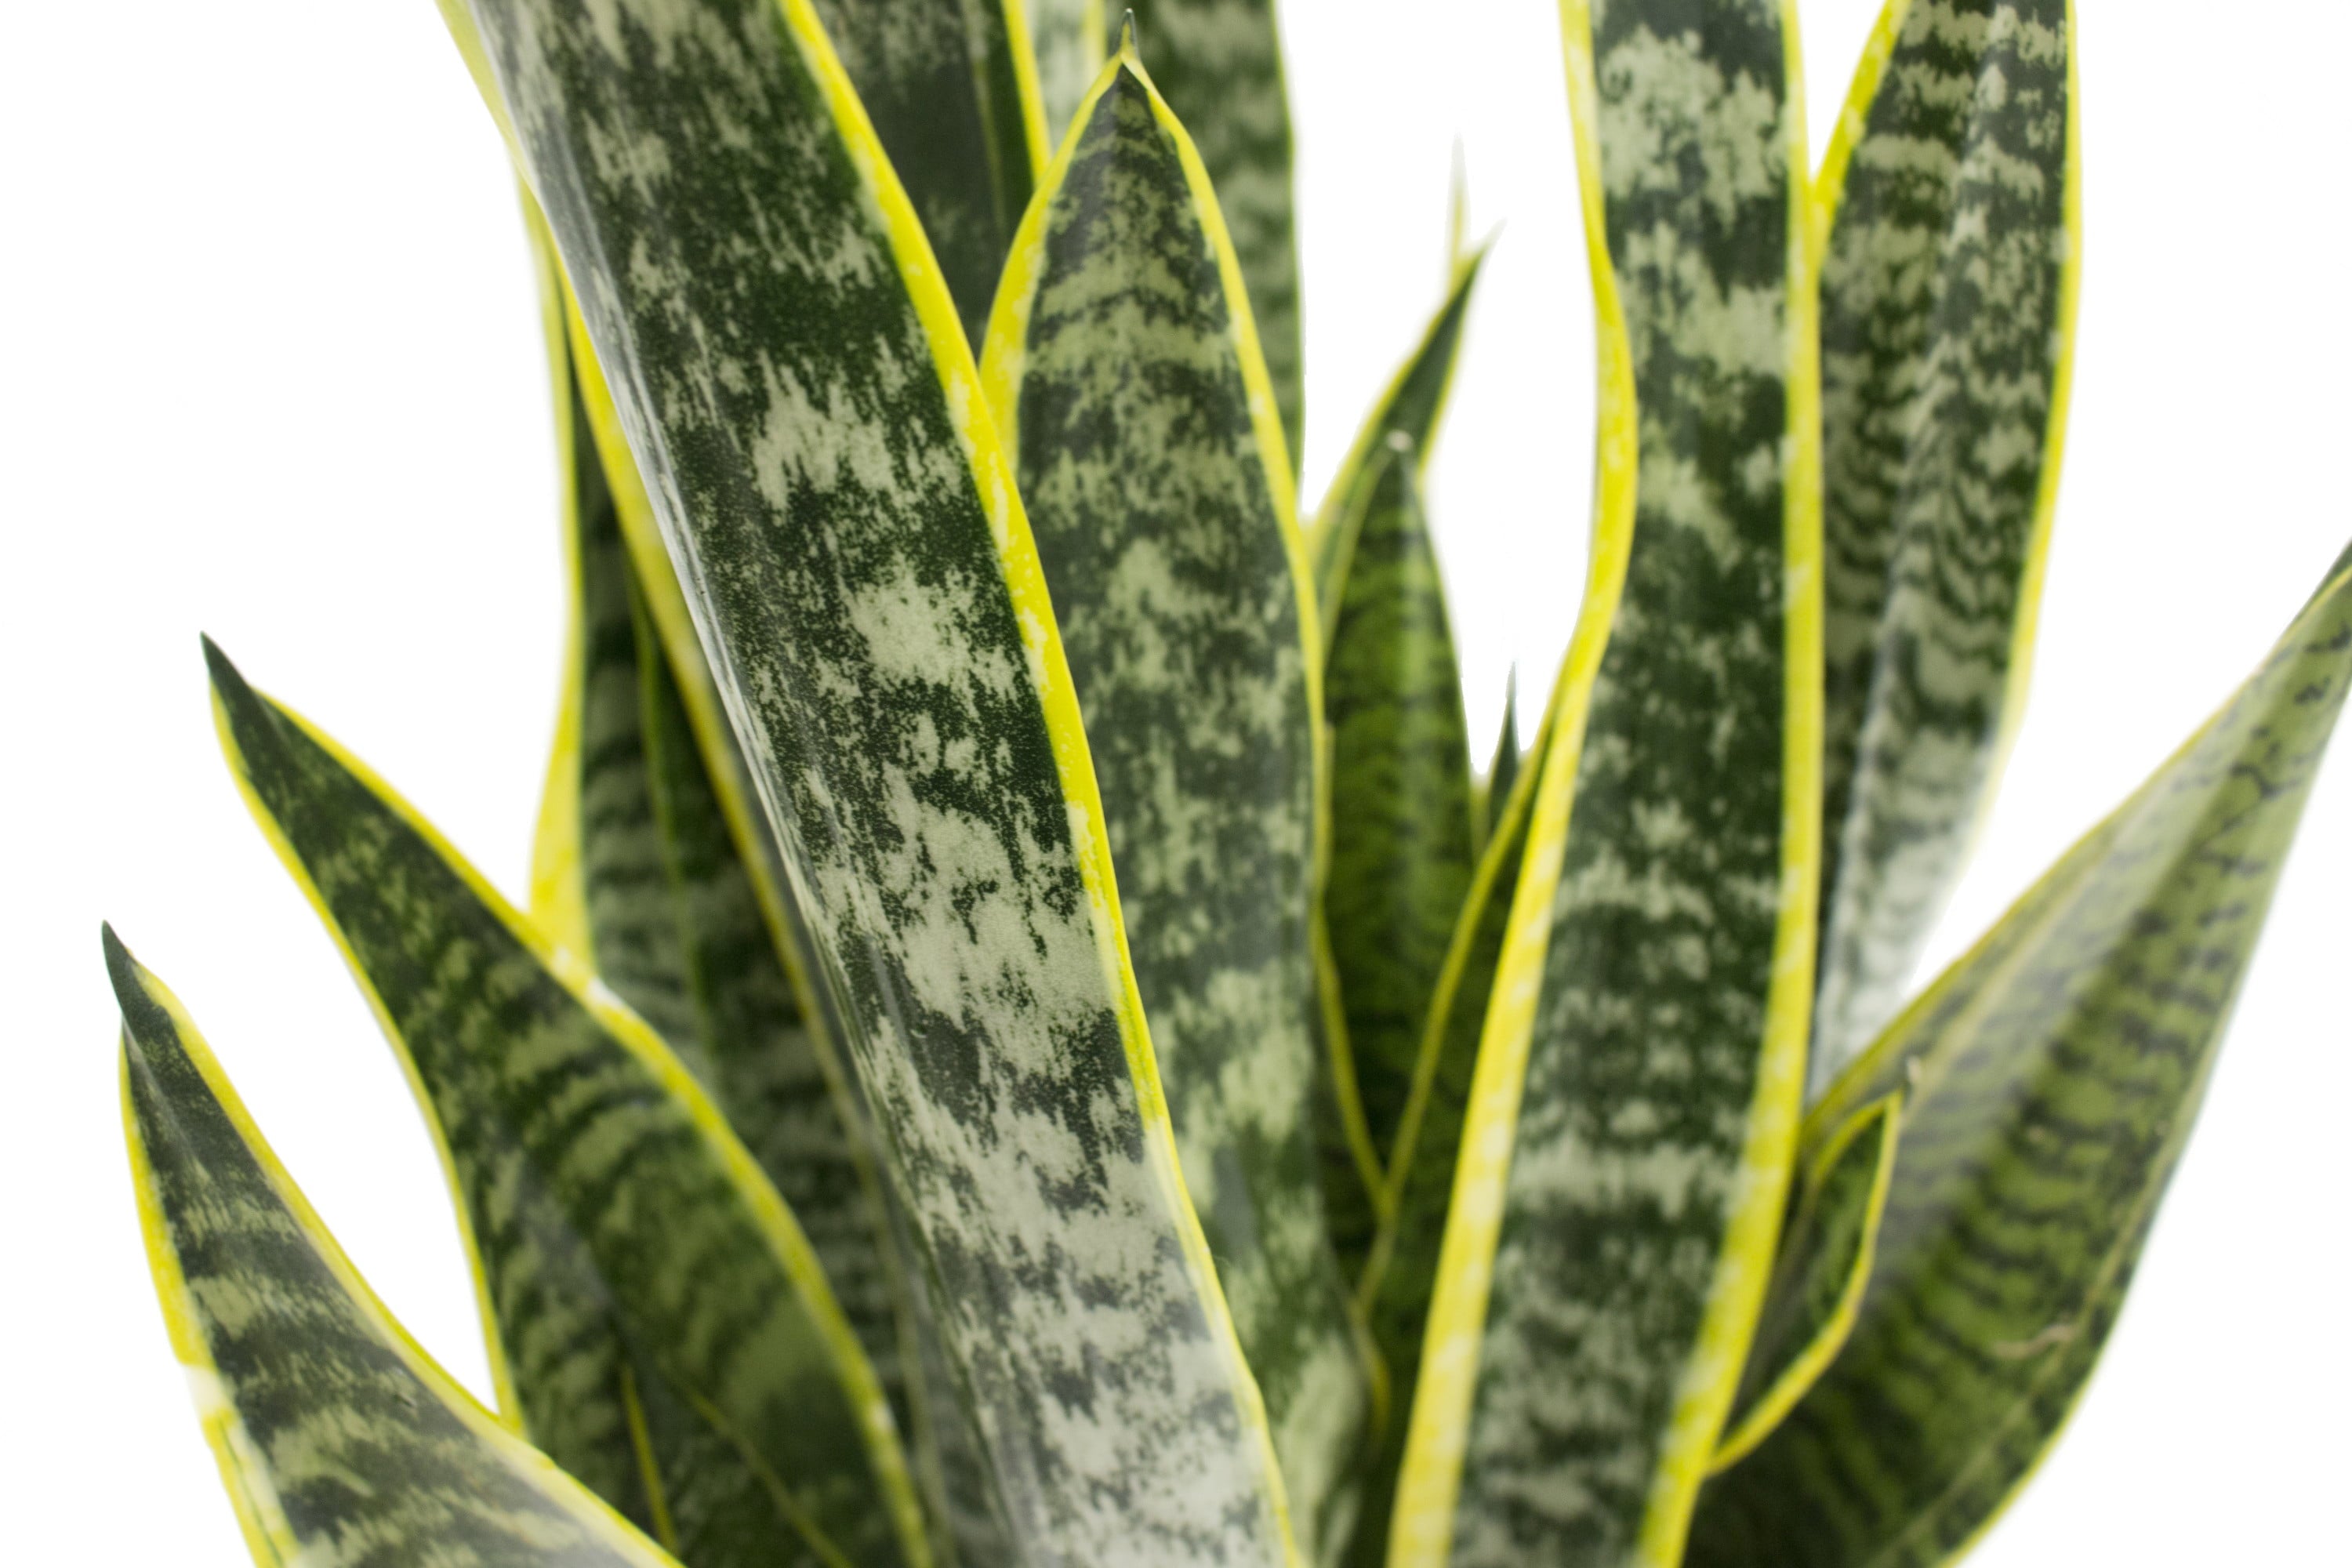 Costa Farms Plants with Benefits Live Indoor 30in. Tall Green Snake Plant; Bright， Indirect Sunlight Plant in 8.75in. Décor Pot